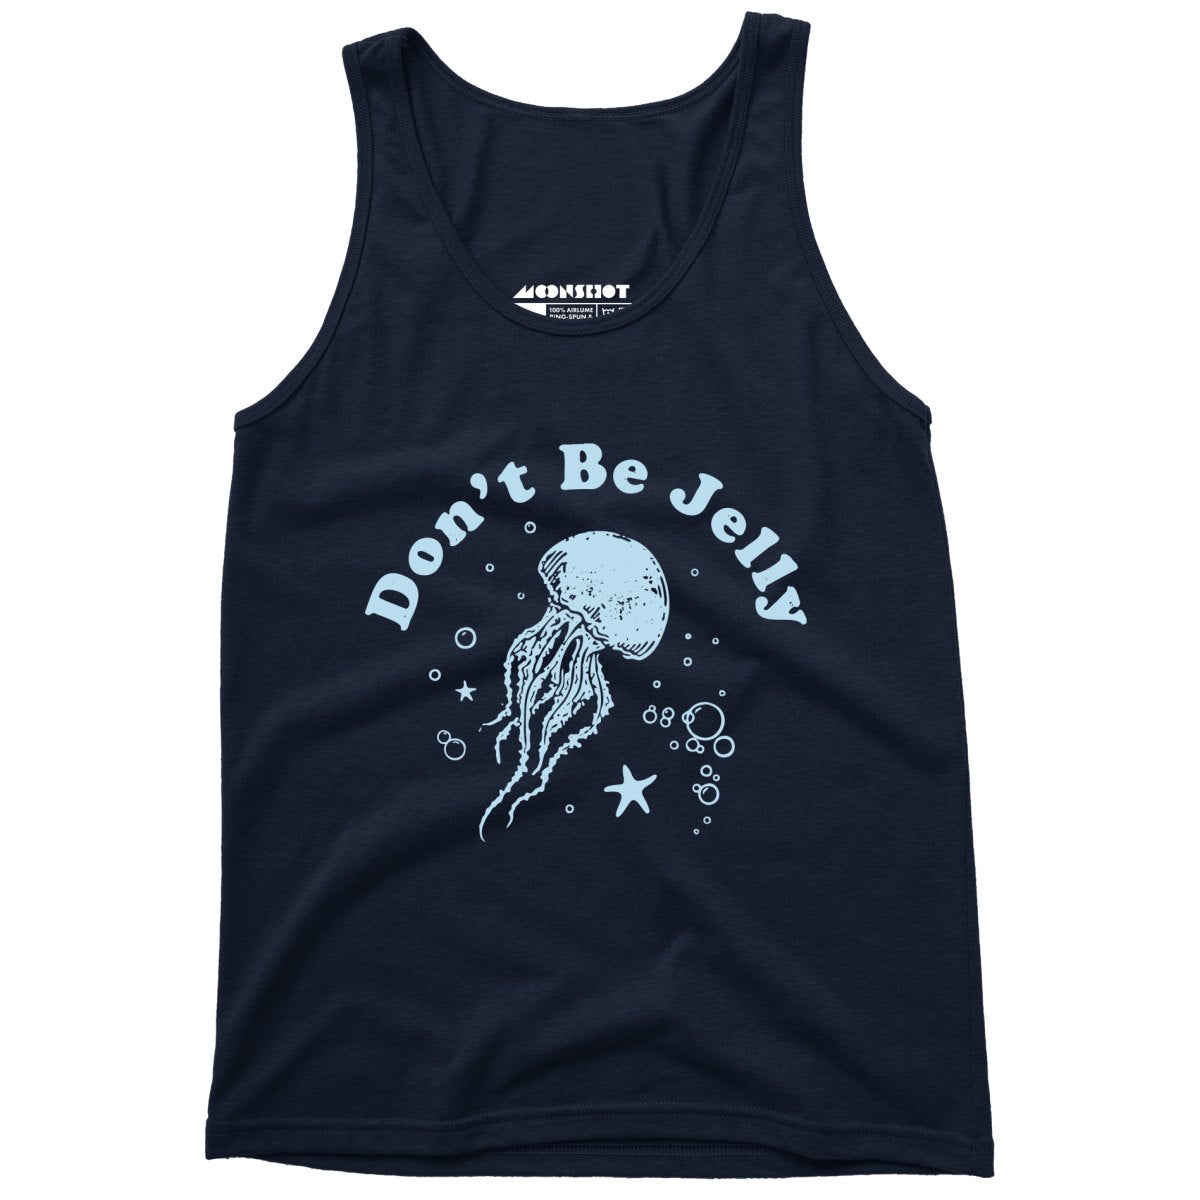 Don't Be Jelly - Unisex Tank Top